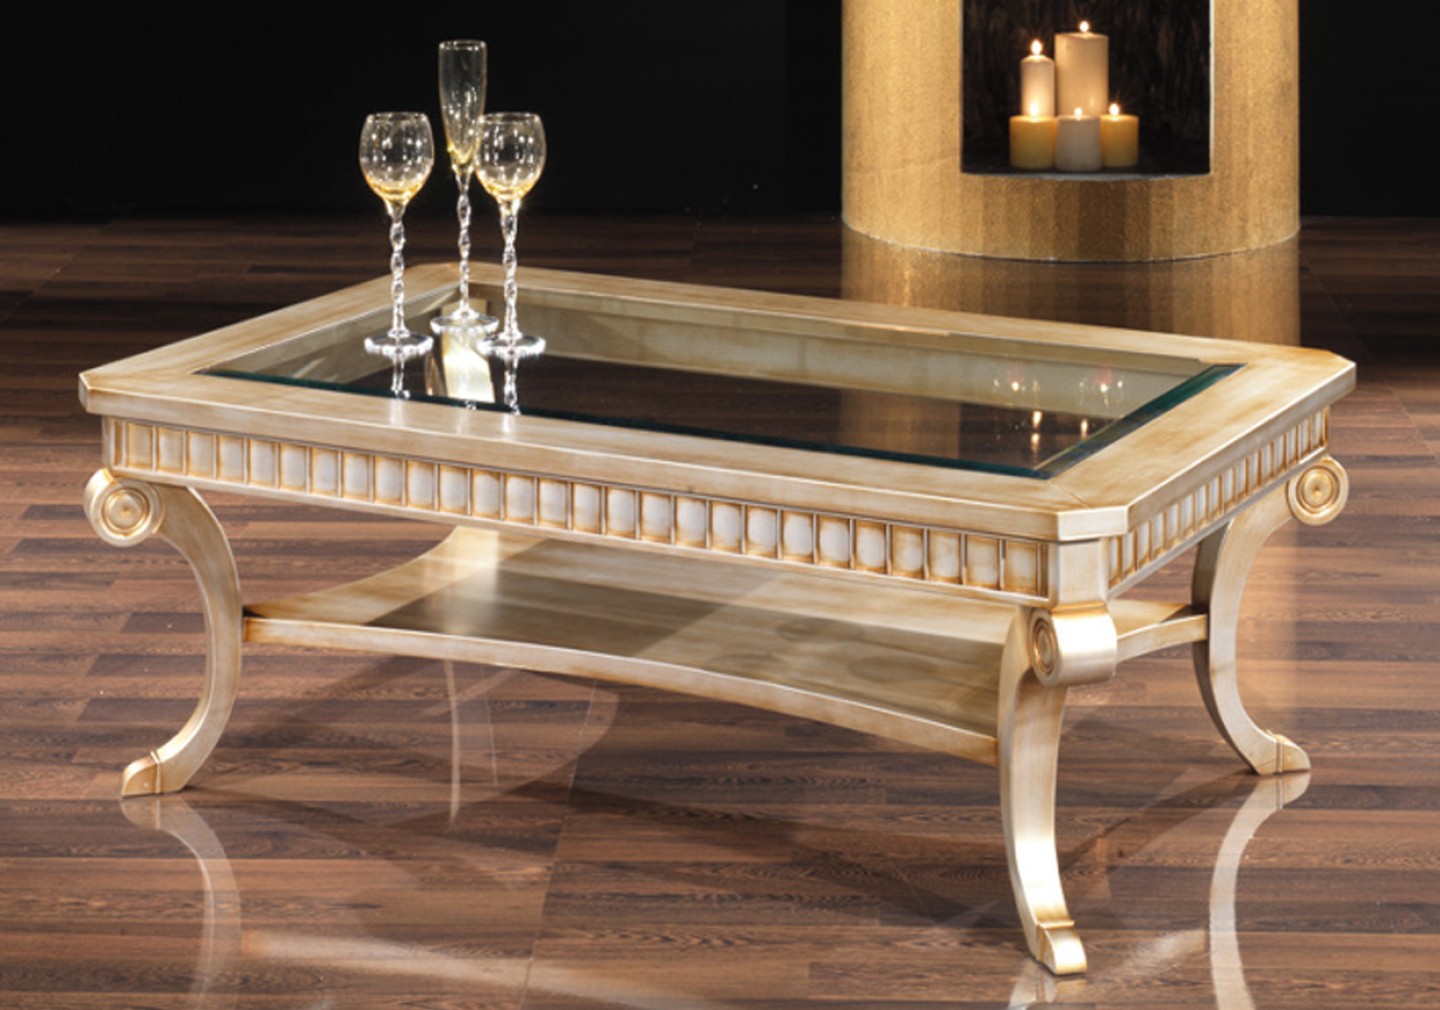 THE ANDROMEDA CLASSIC COFFEE TABLE